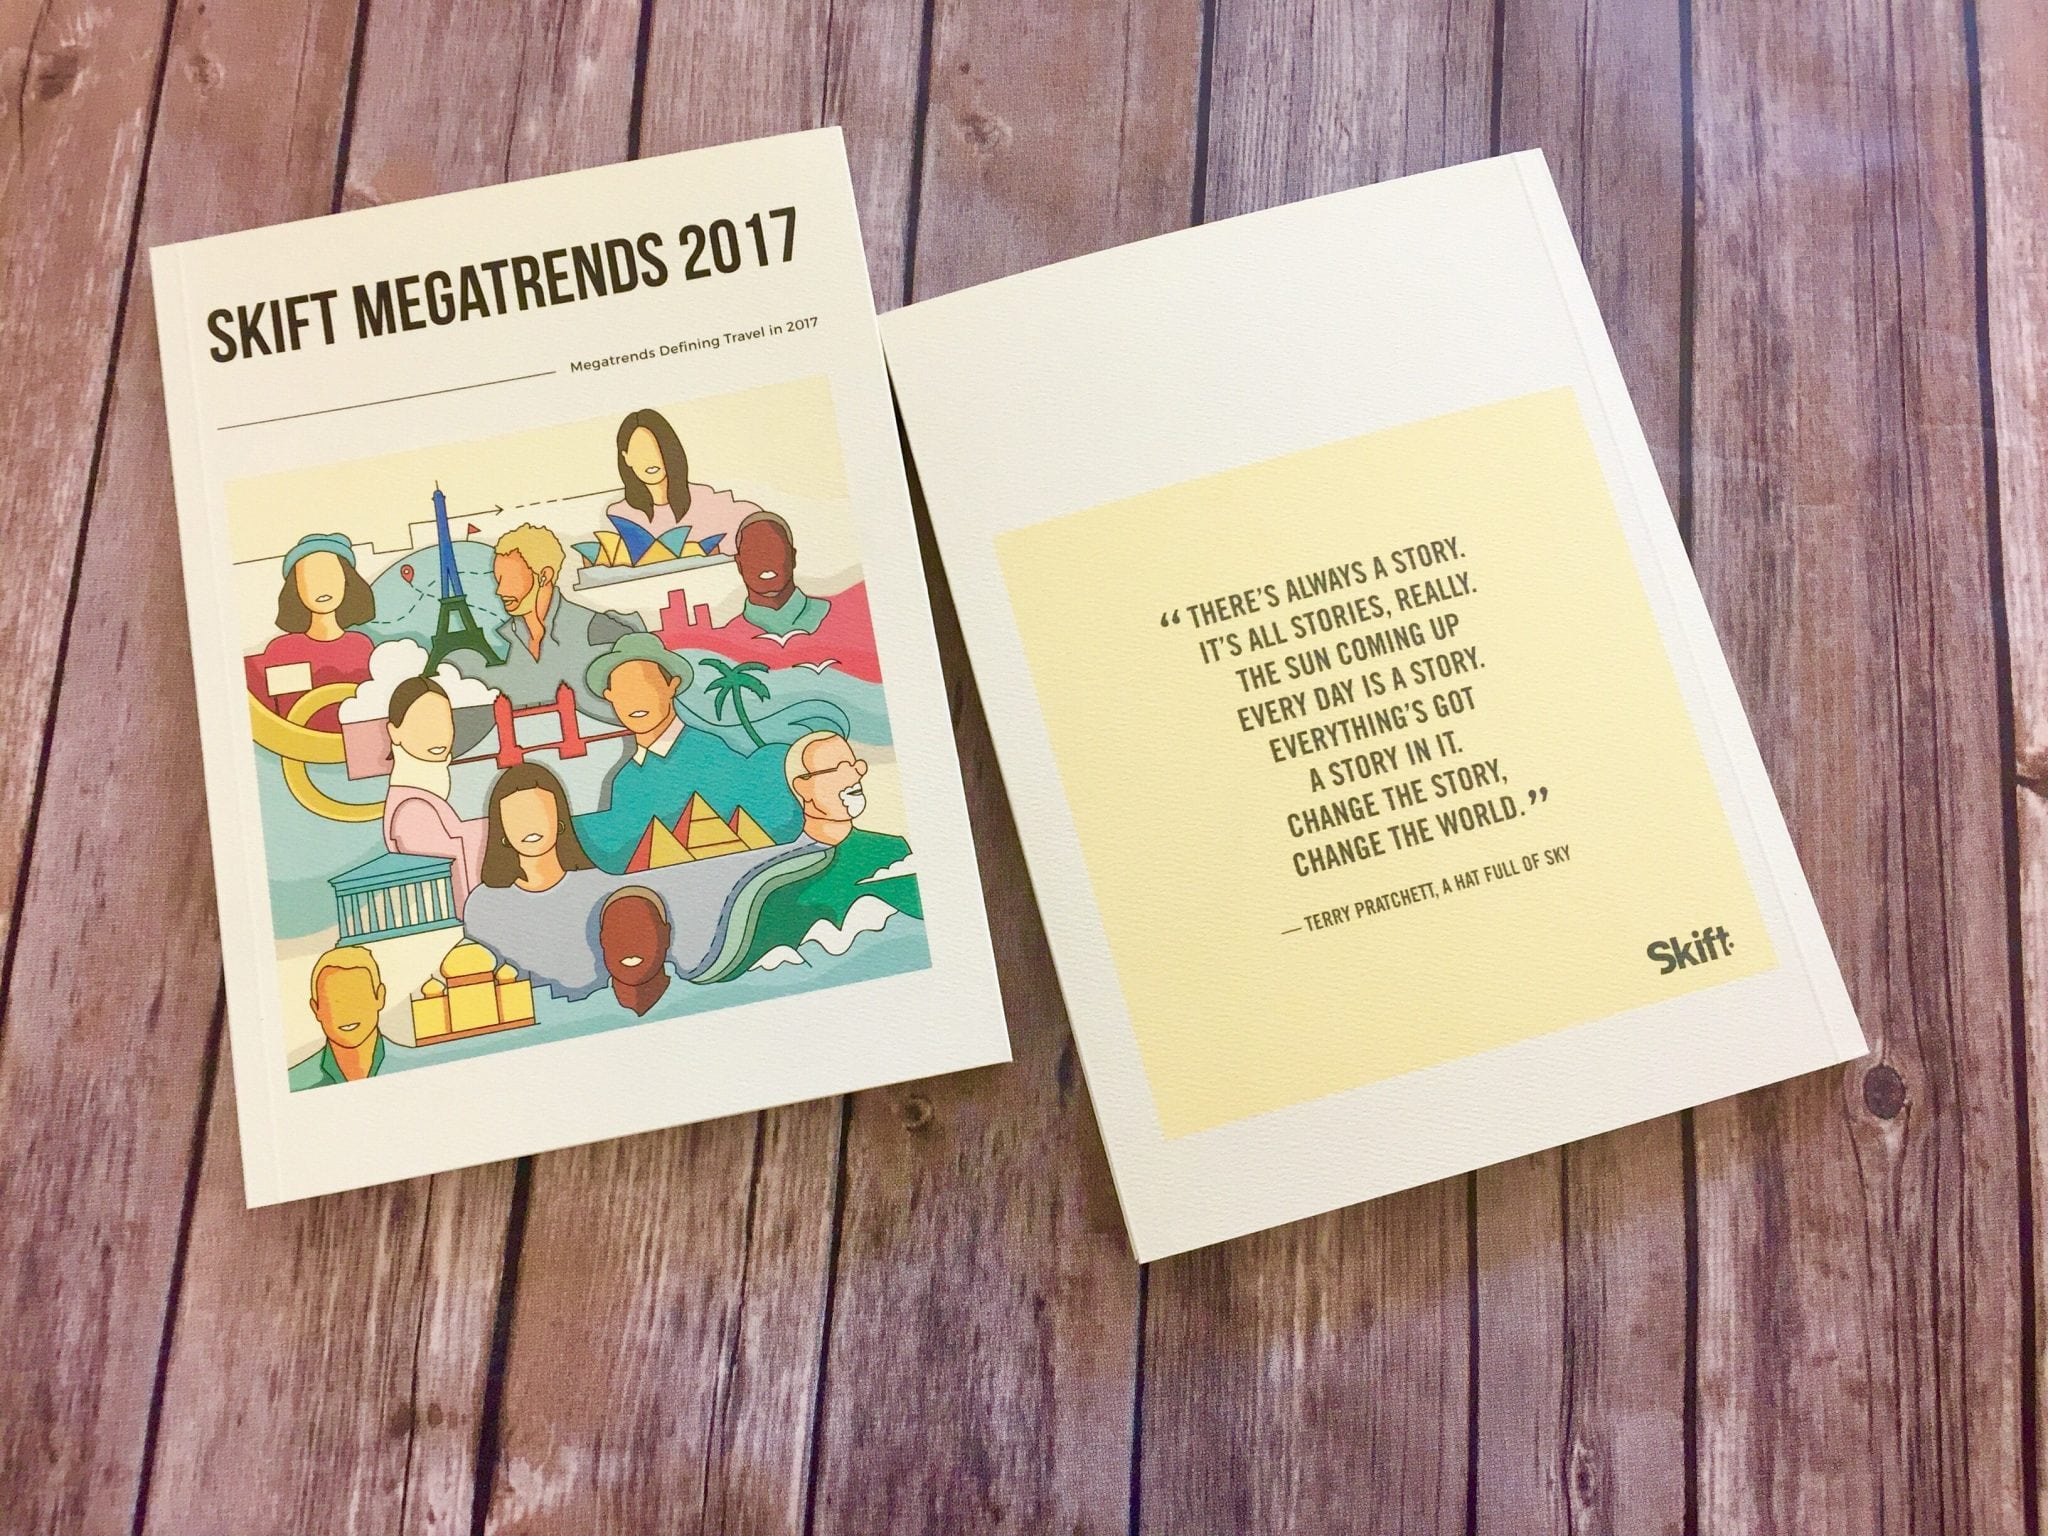 This week, Skift launched its largest annual editorial effort: the 2017 Travel Megatrends Magazine.